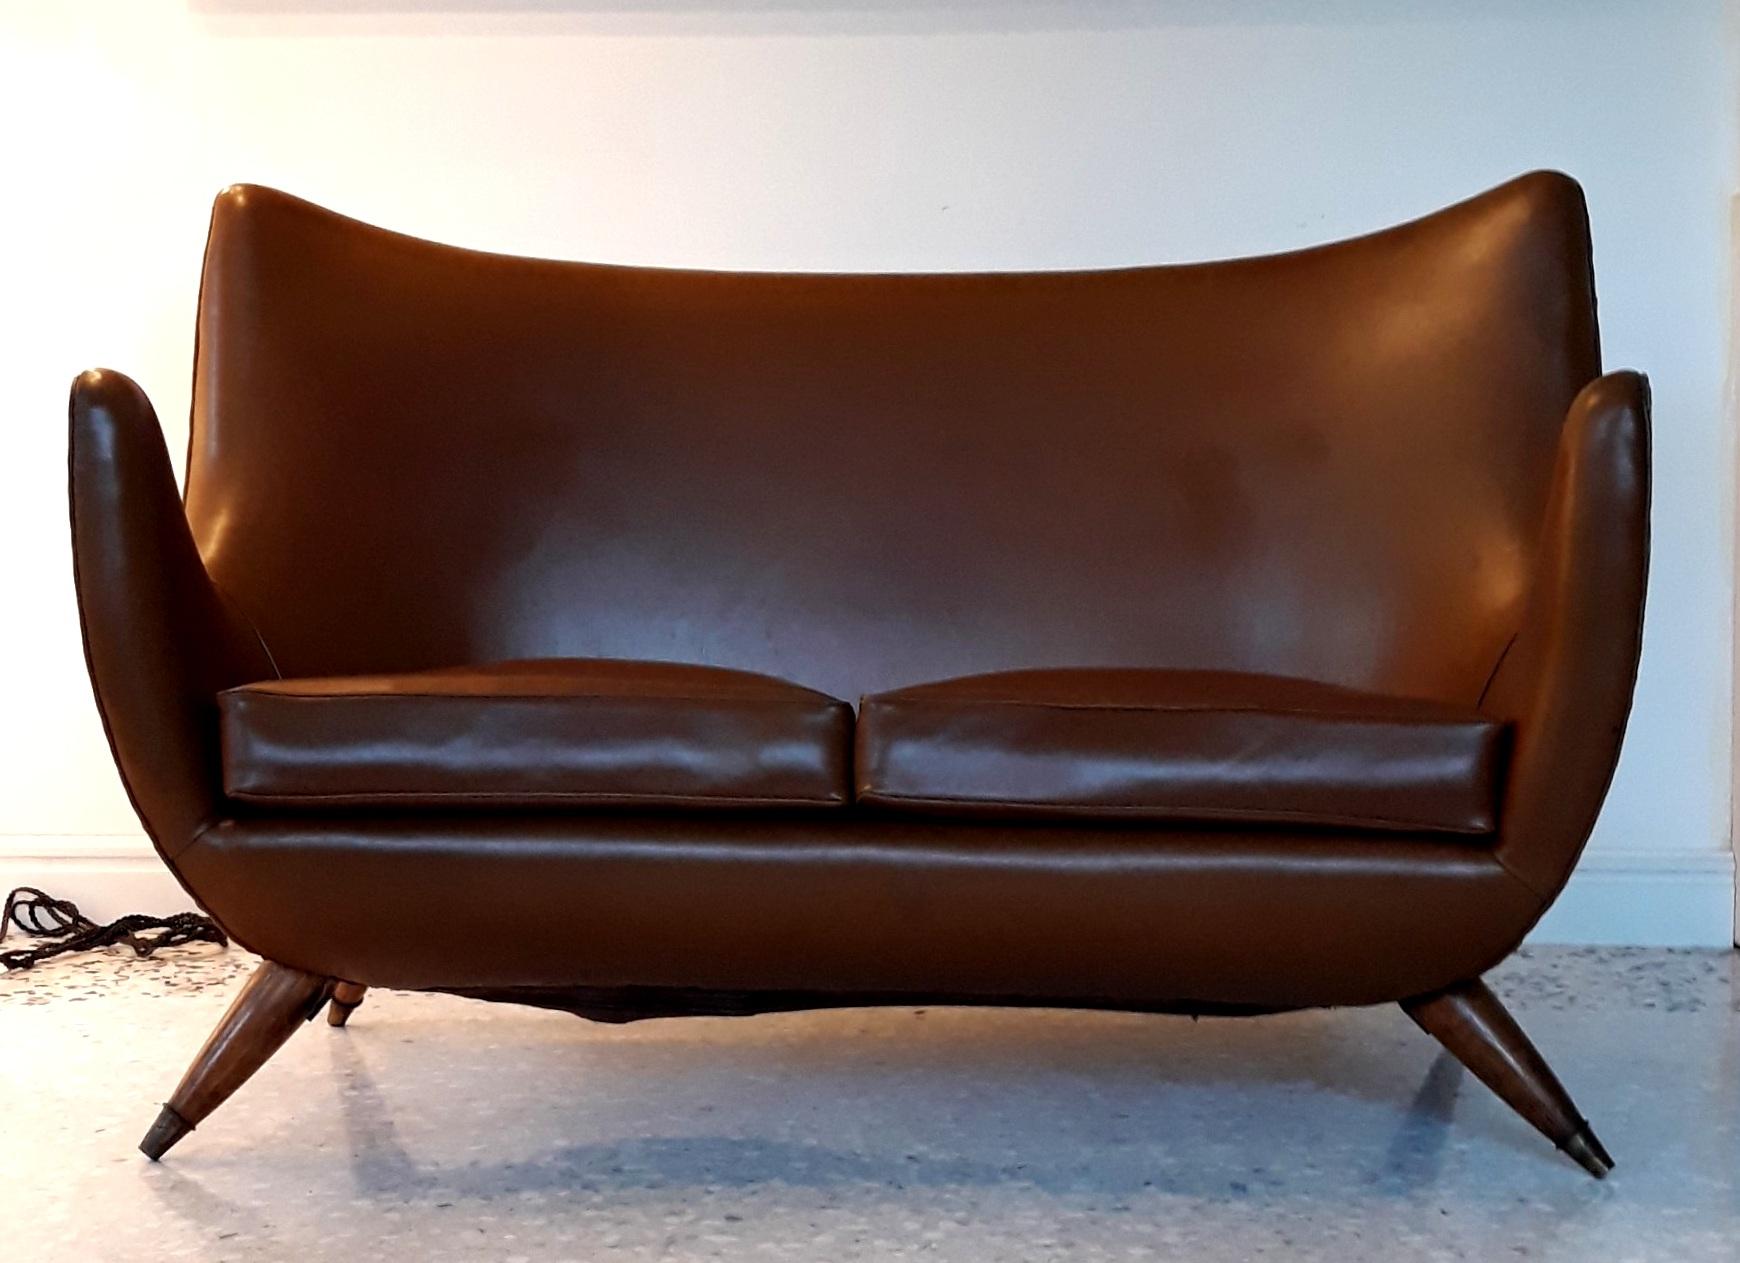 Nice two places curved sofa with very representative design of Italian fifties.
The wood legs with brass feet are prominent and strongly inclined.
The shape is intentionally curved.

The structure and the original cover are in good original